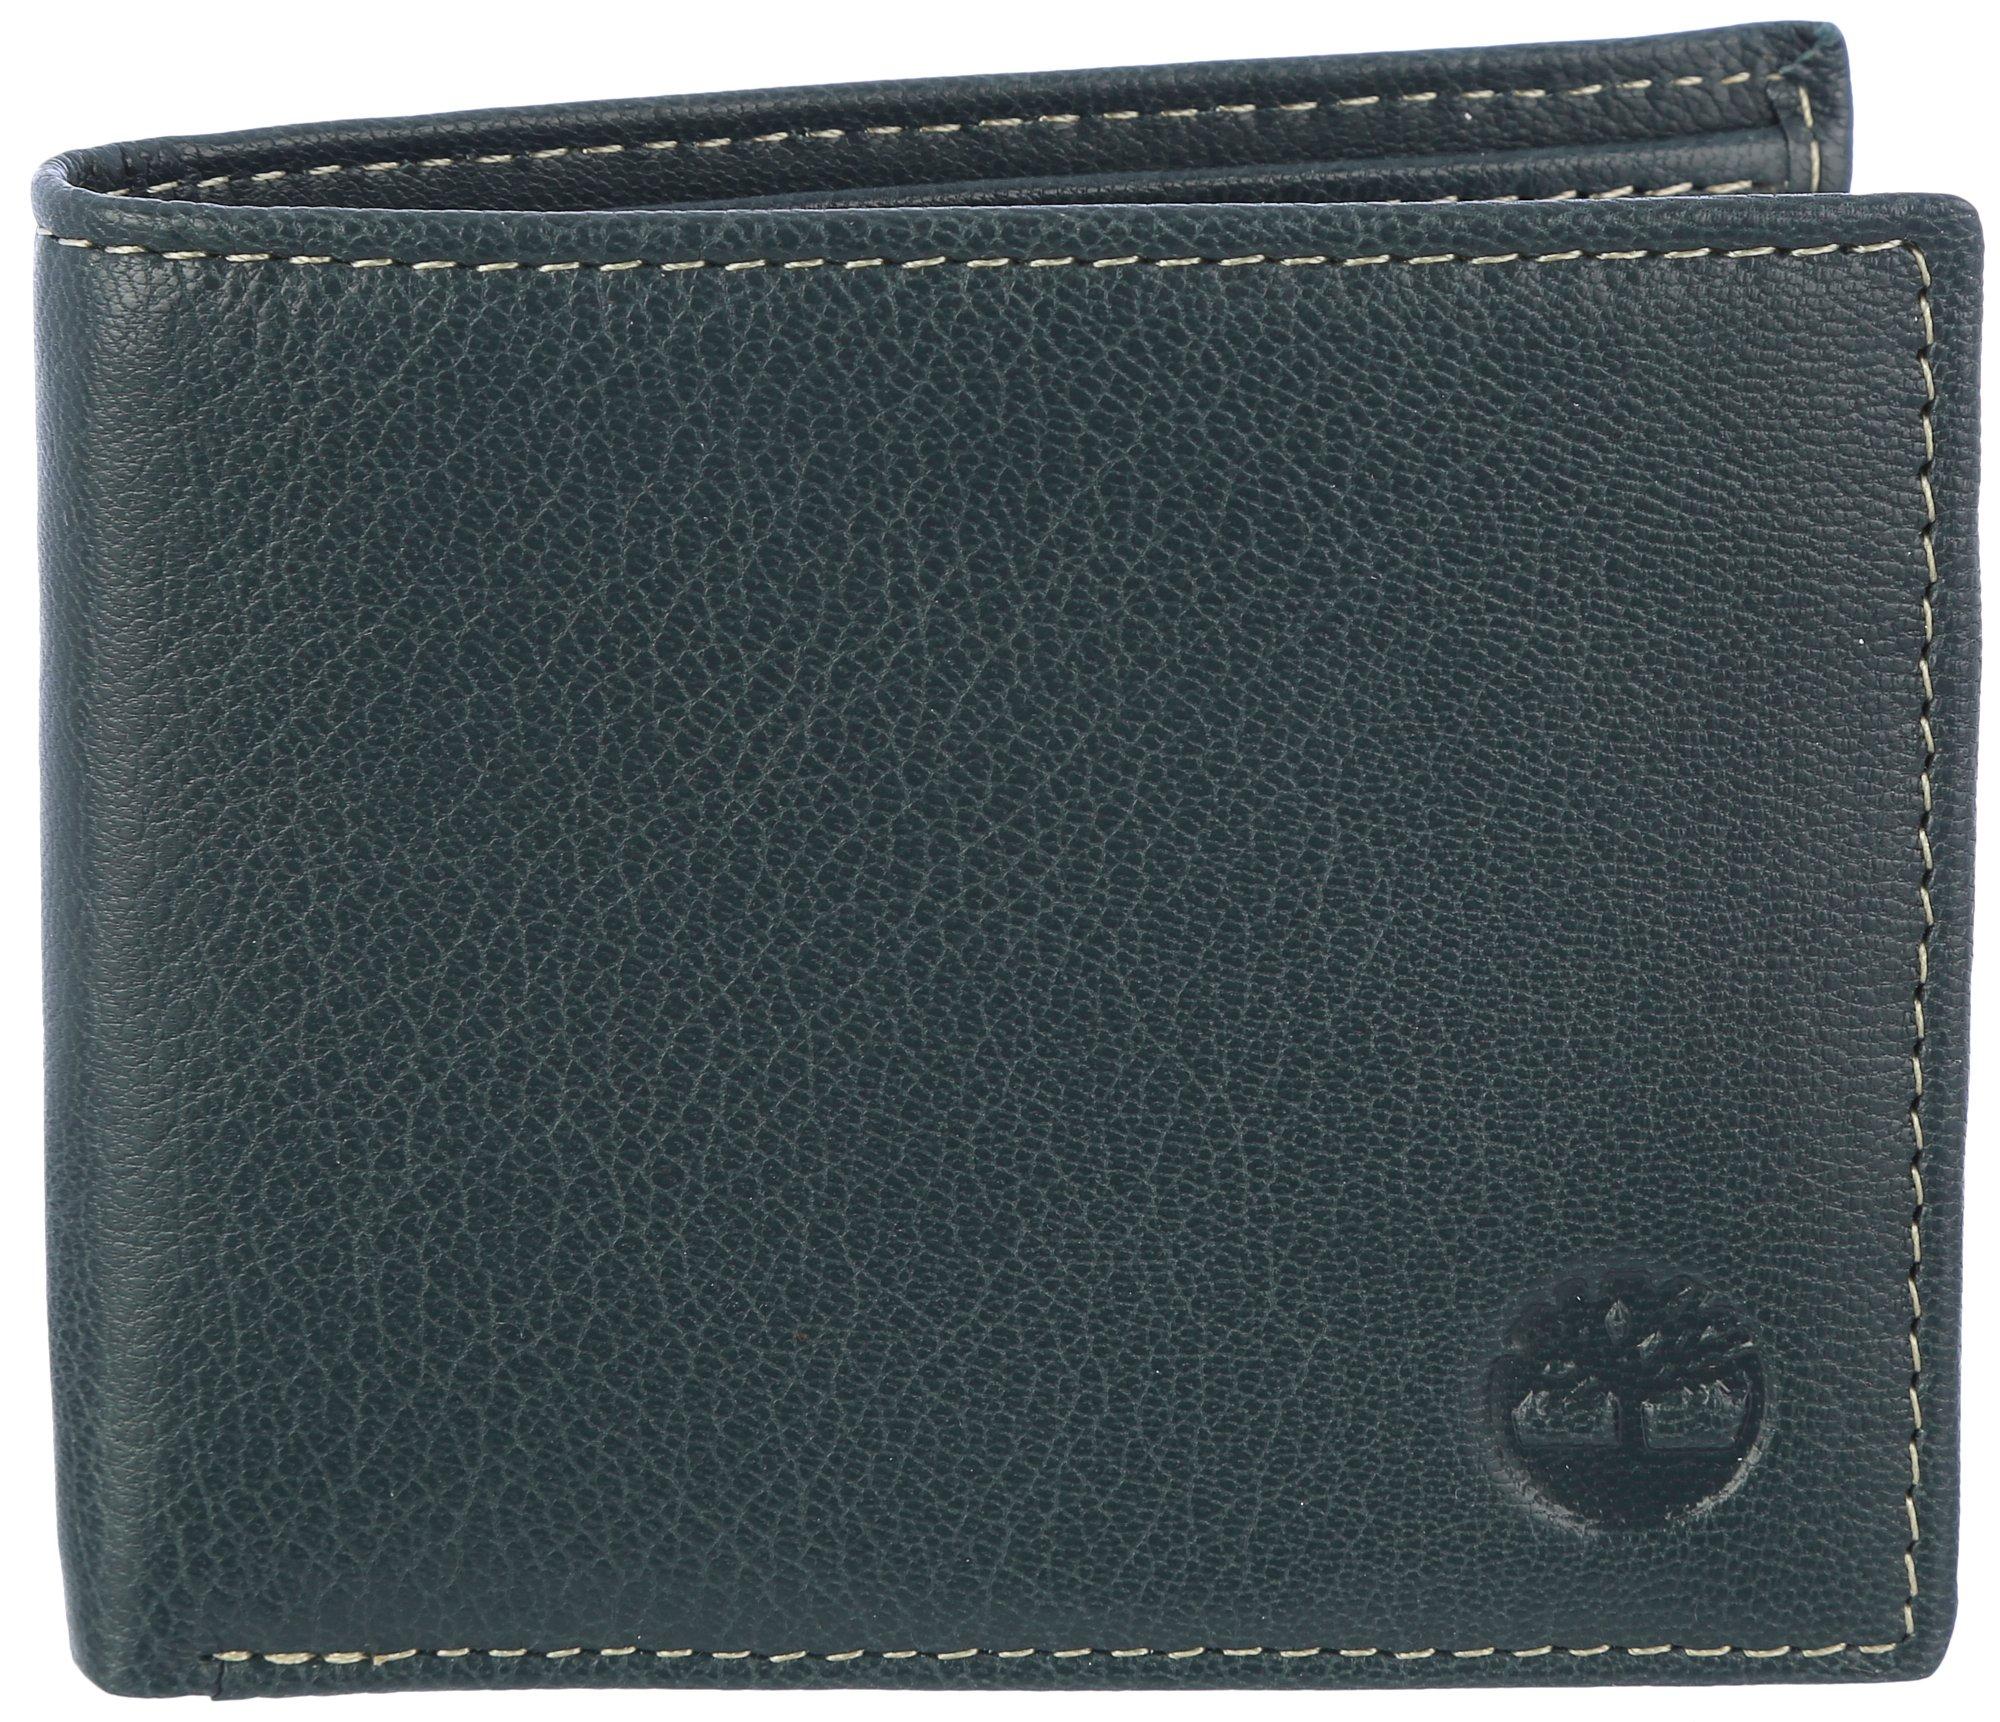 Timberland Mens Genuine Leather Passcase Wallet